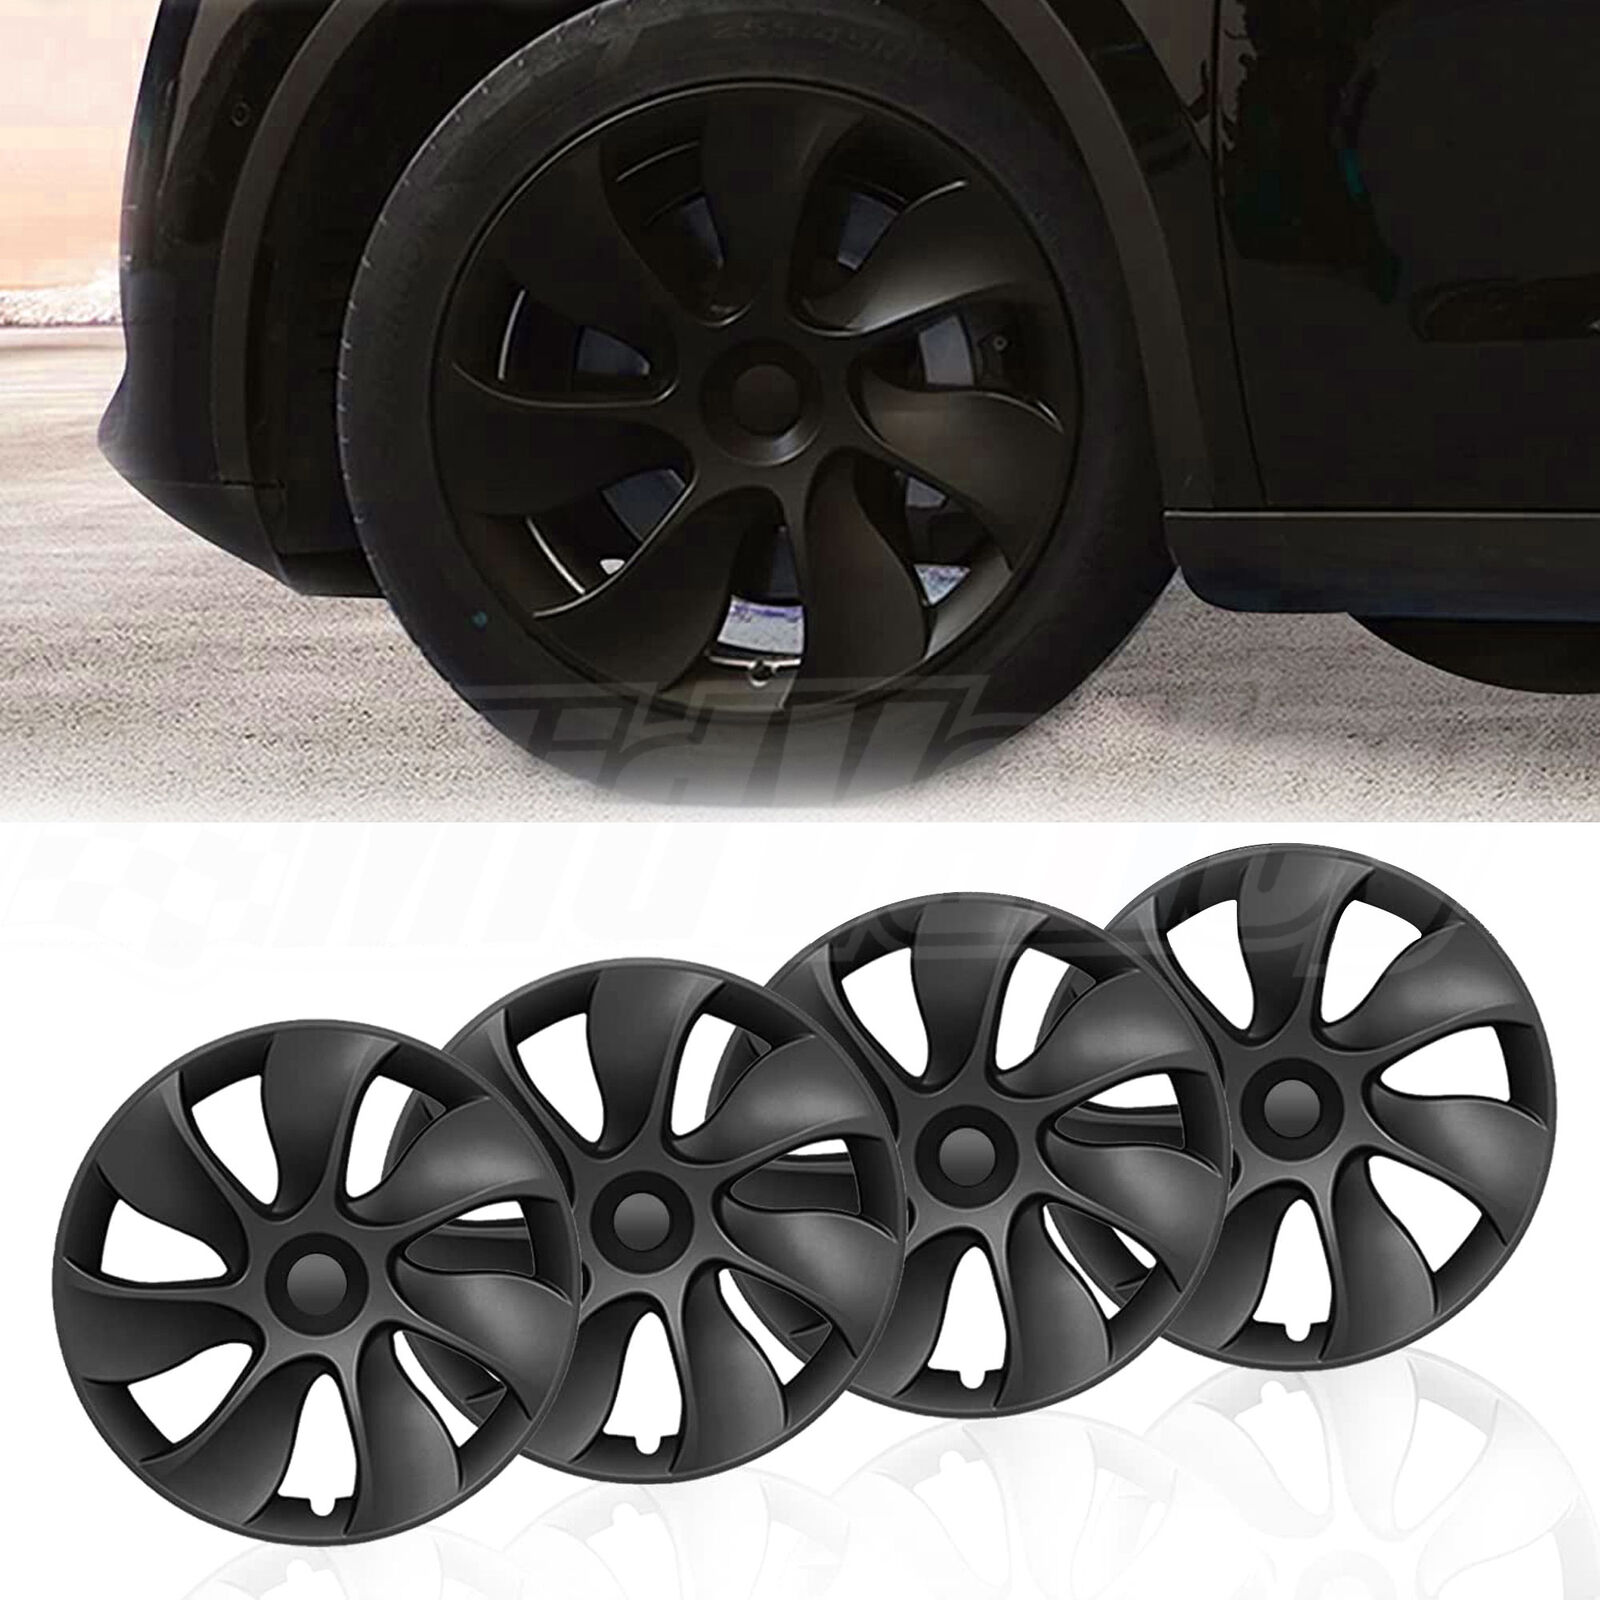 4PCS 19inch Hubcaps for 20-23 Tesla Model Y Wheel Rim Cover Full Cover Hubcaps